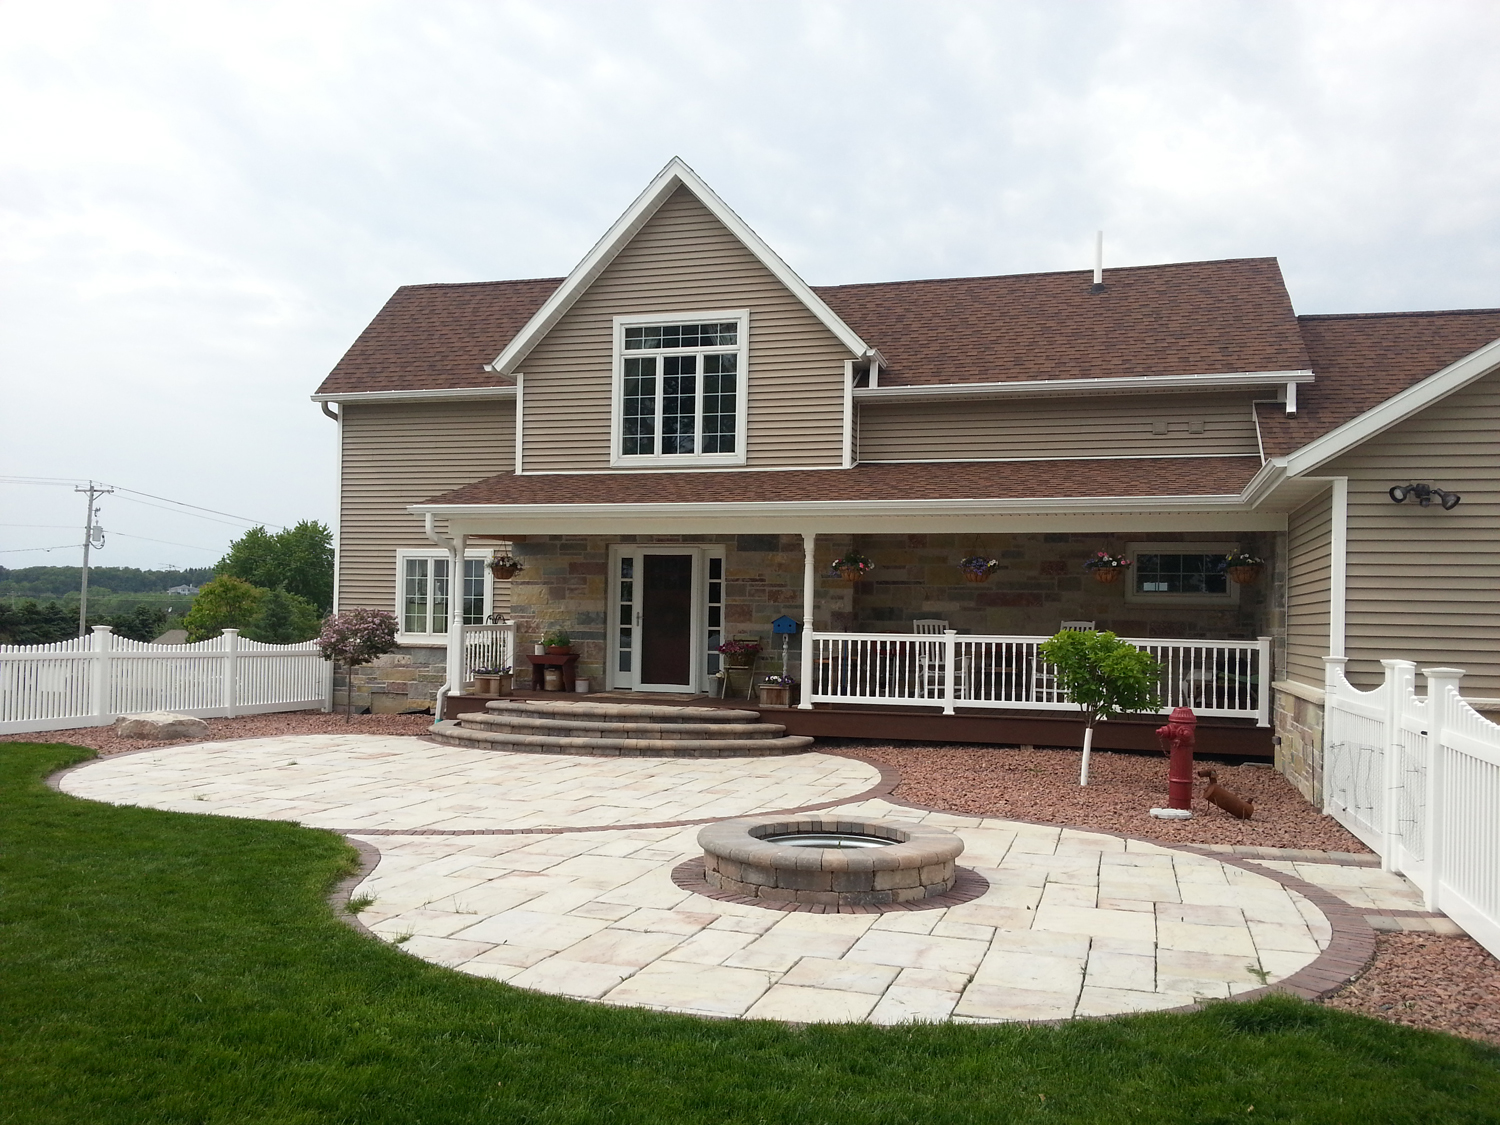 Install Design Services Landscape Solutions Oshkosh Wi Landscape Solutions An Investment That Guarantees Growth